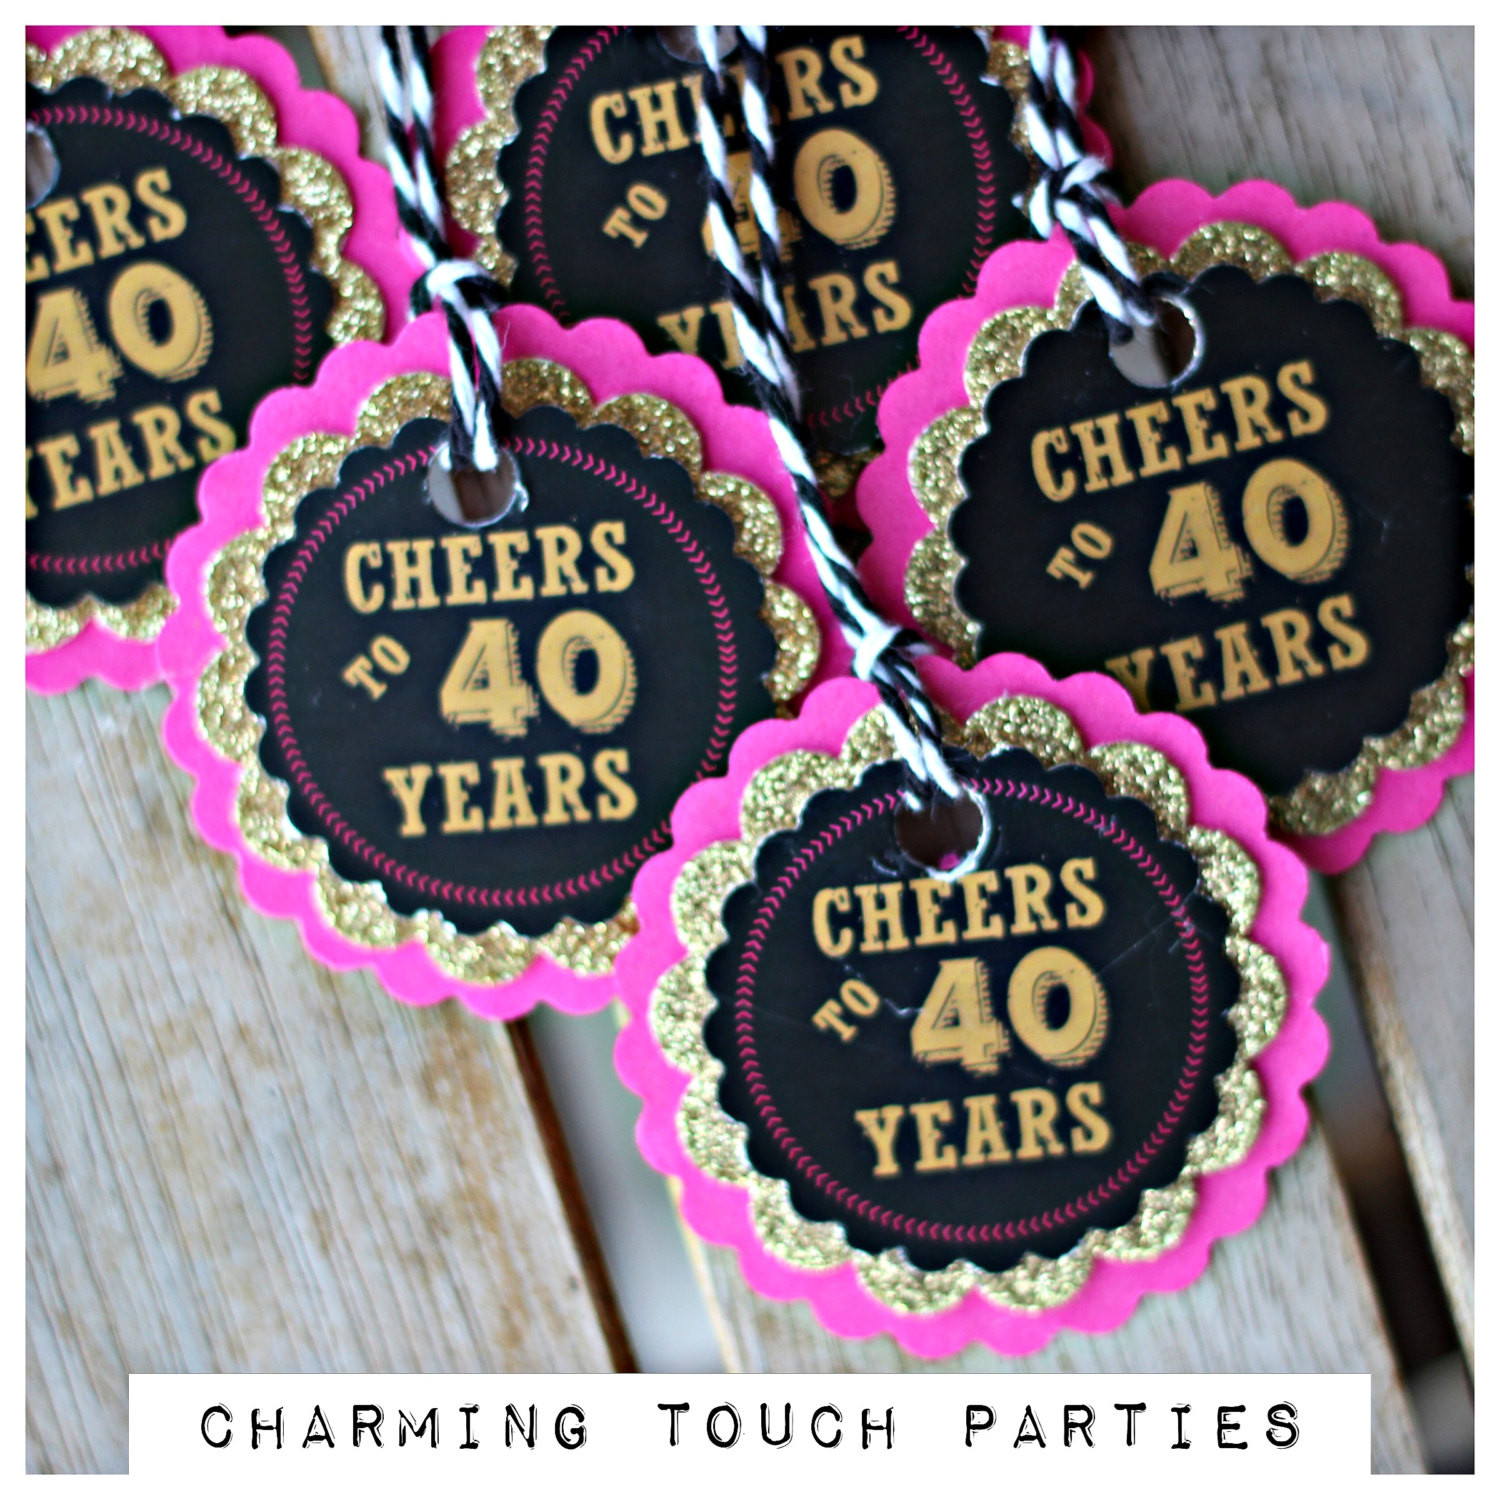 40th Birthday Party Favors
 CHEERS TO 40 YEARS La s Favor Tags 40th Favor 40th Party